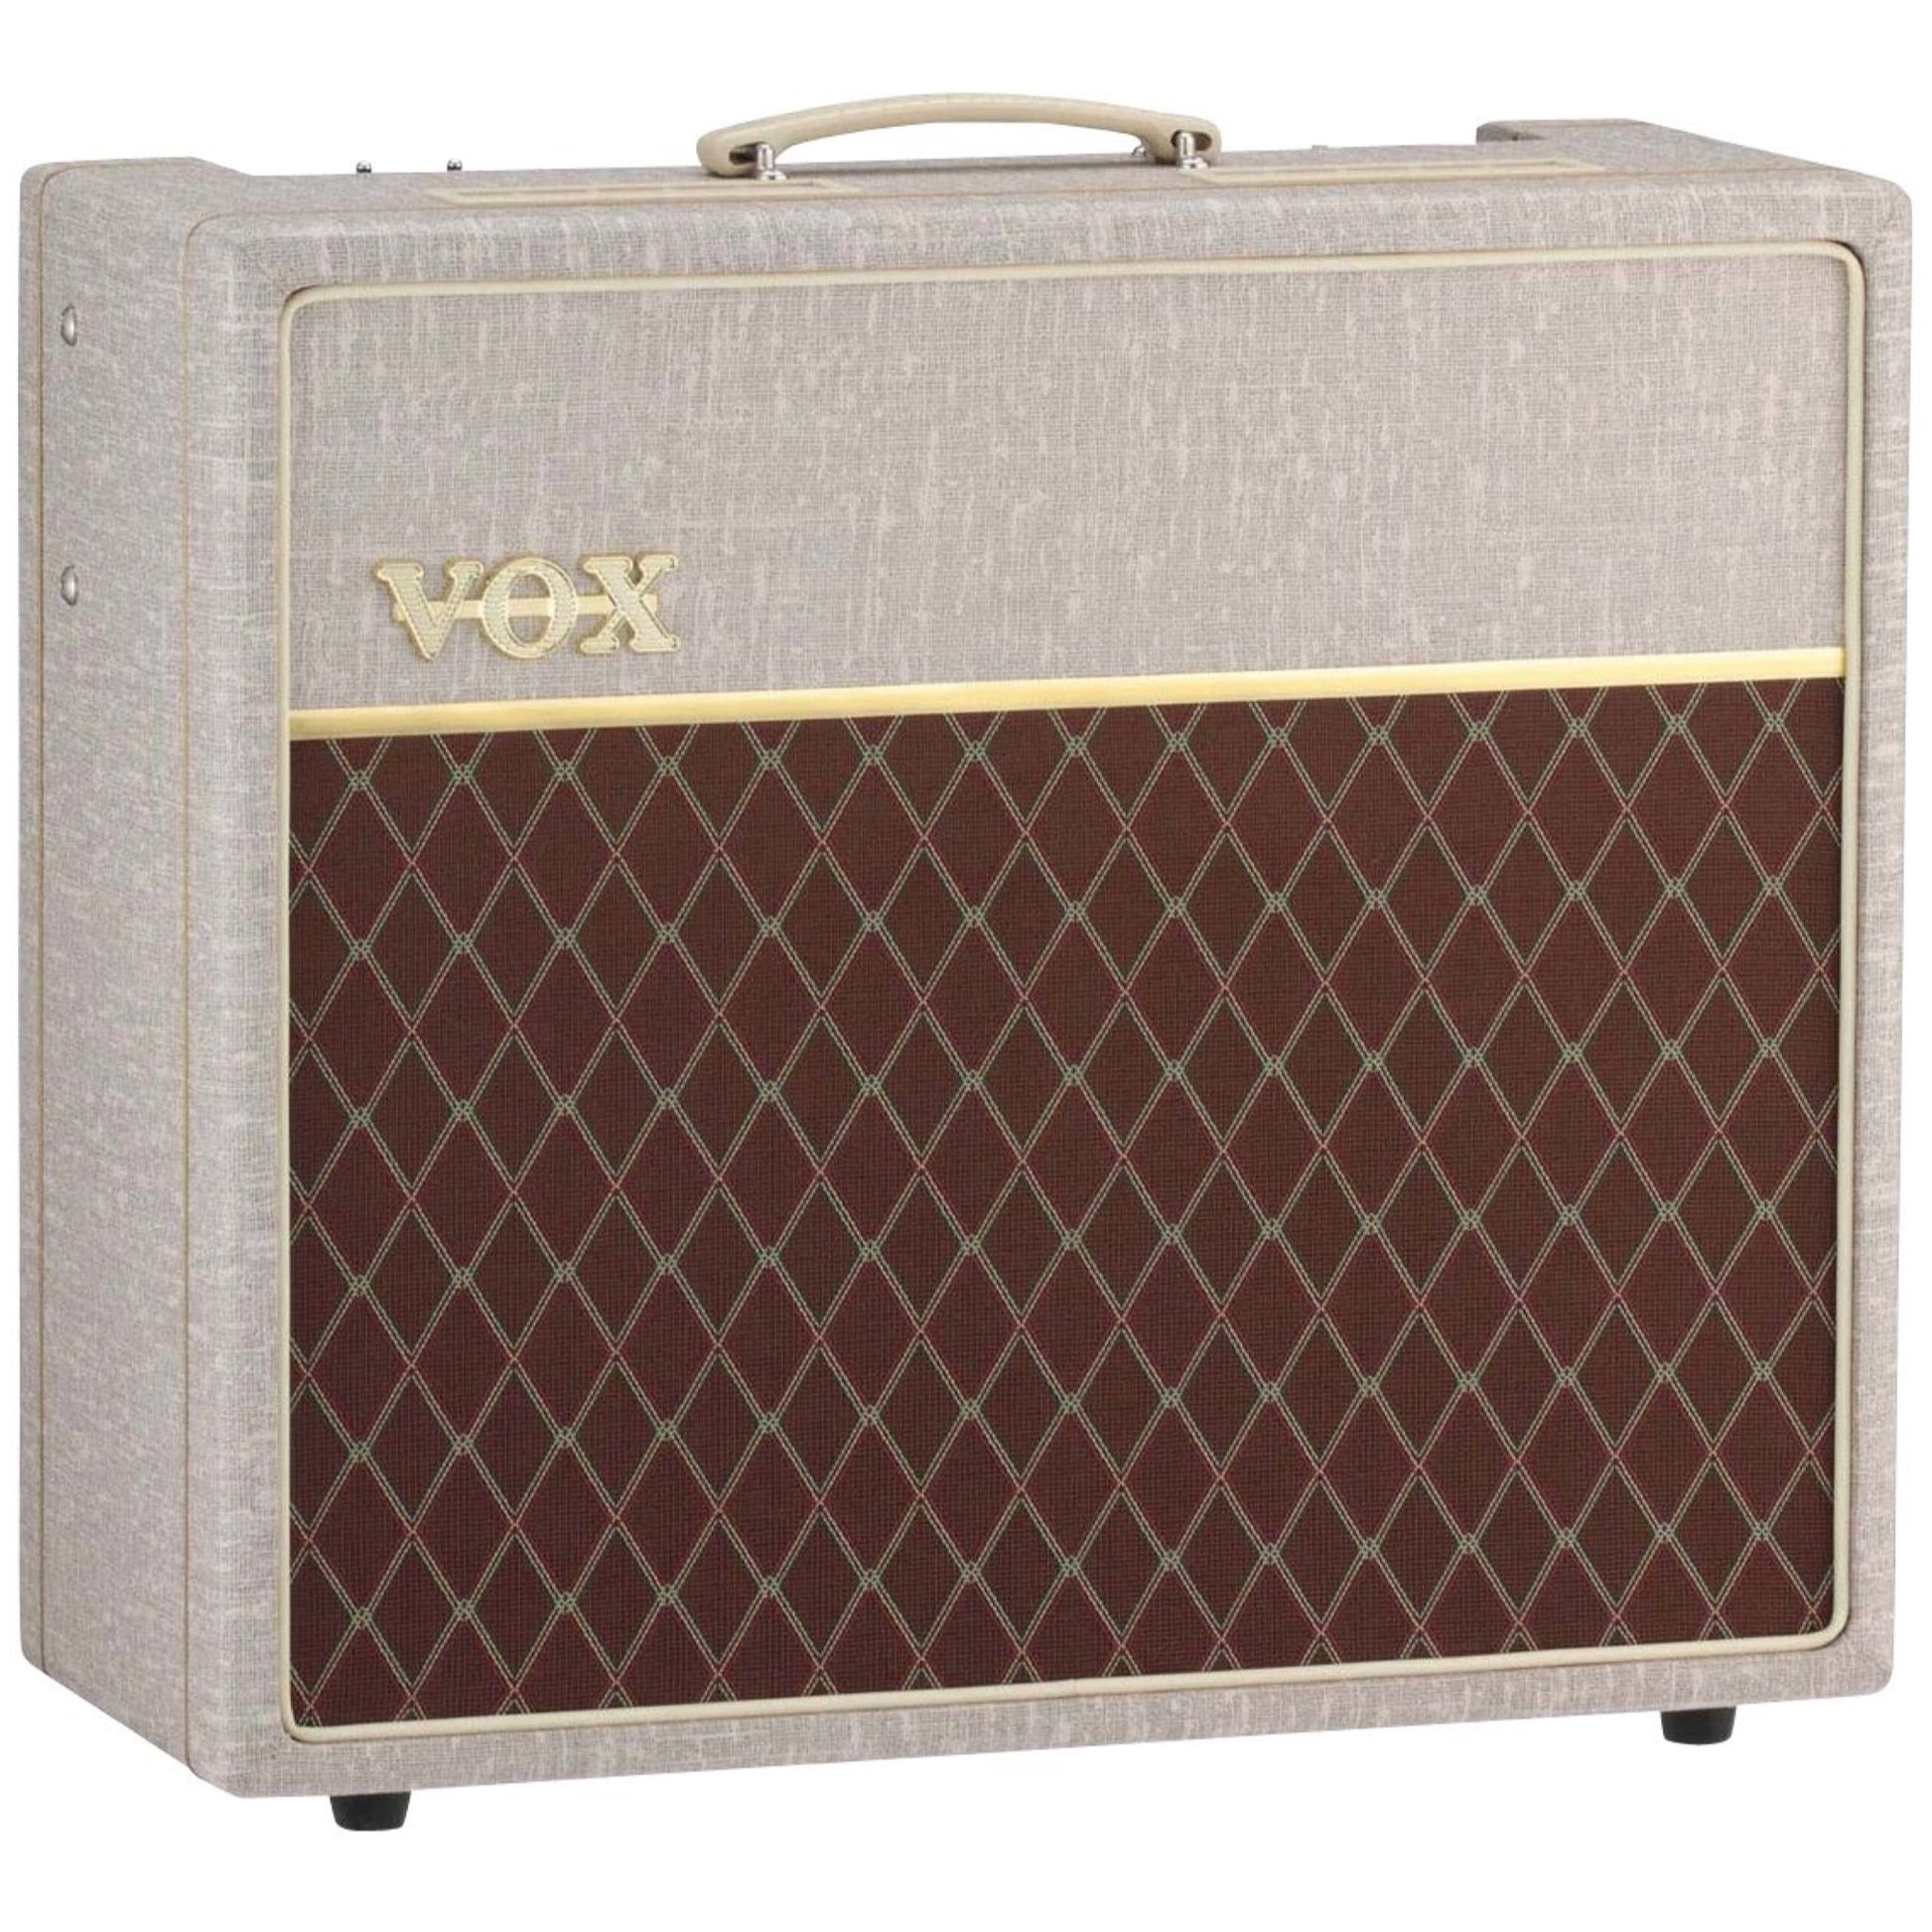 Vox AC15HW1 Hand-Wired Guitar Combo Amplifier (15 Watts, 1x12 Inch)